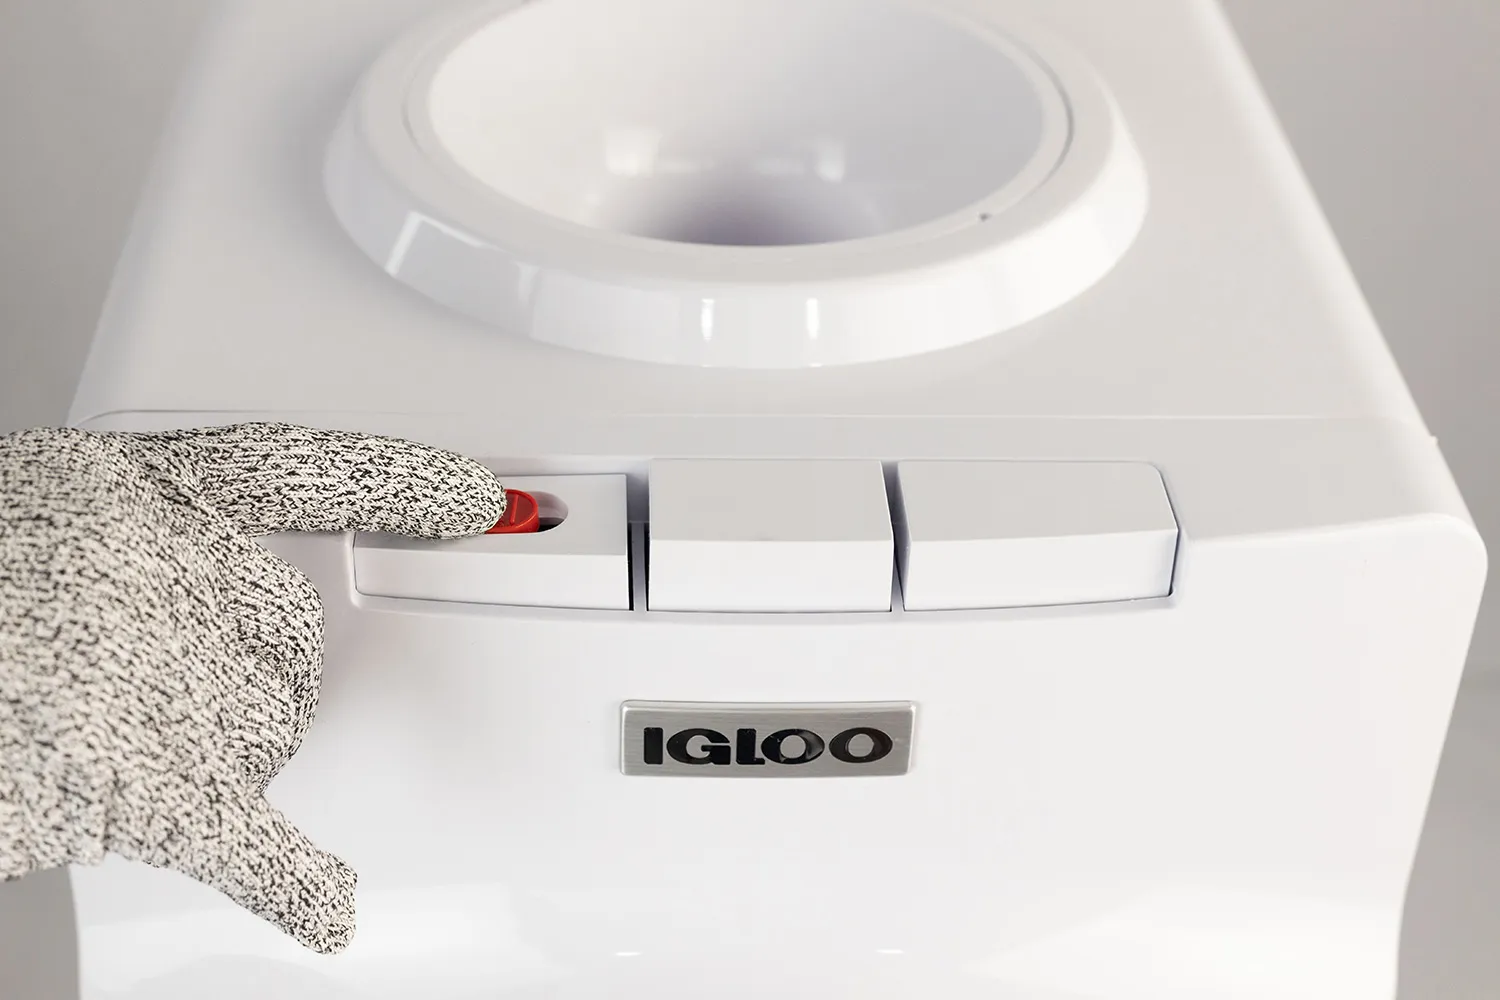 Igloo countertop ice maker - review 